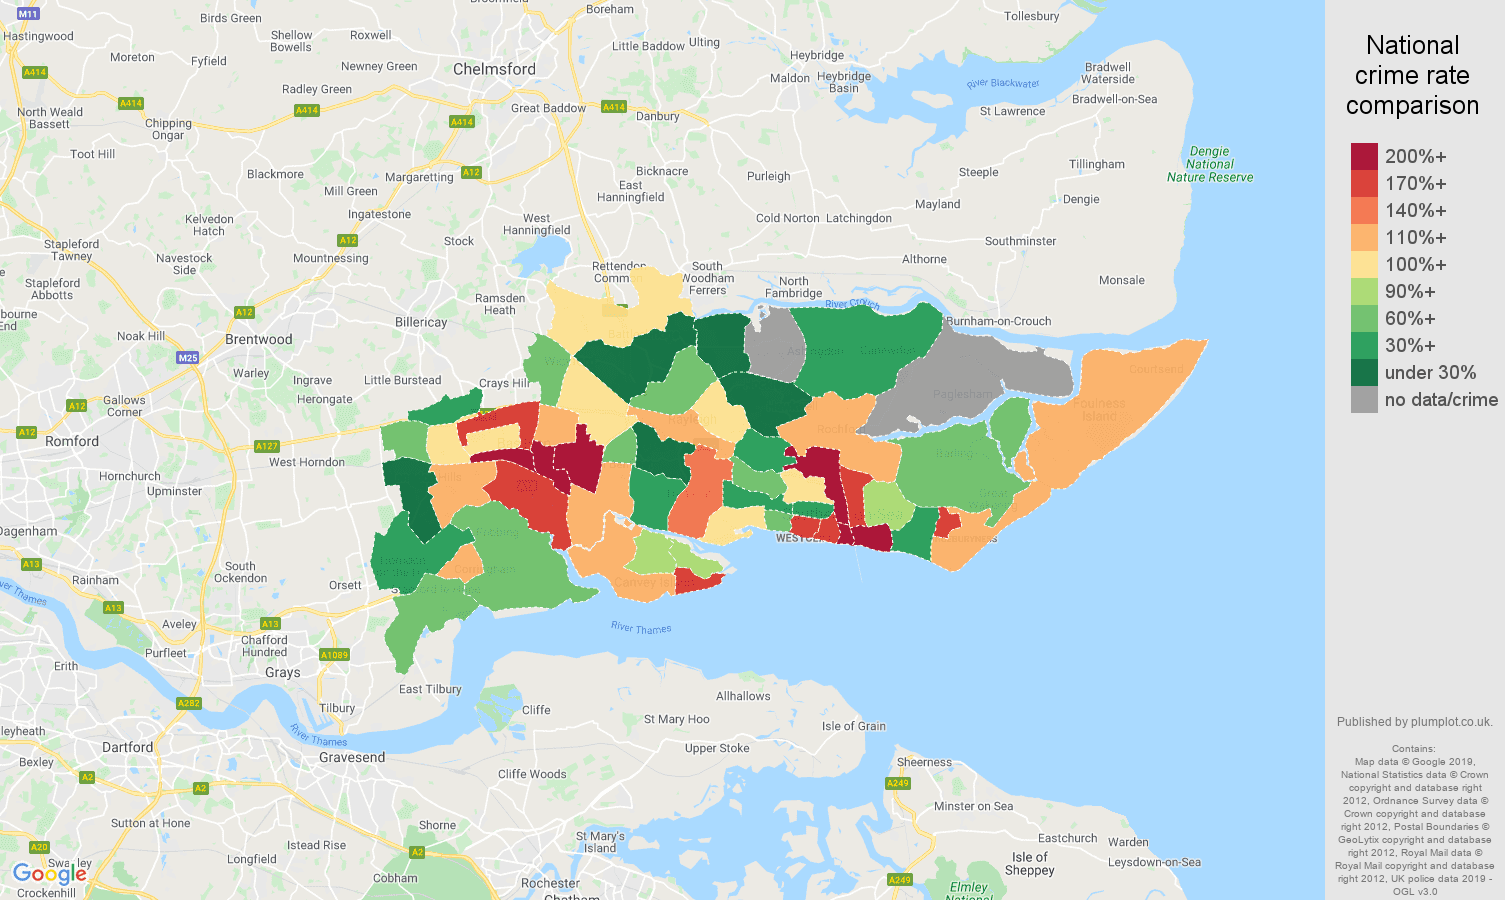 Southend on Sea possession of weapons crime rate comparison map